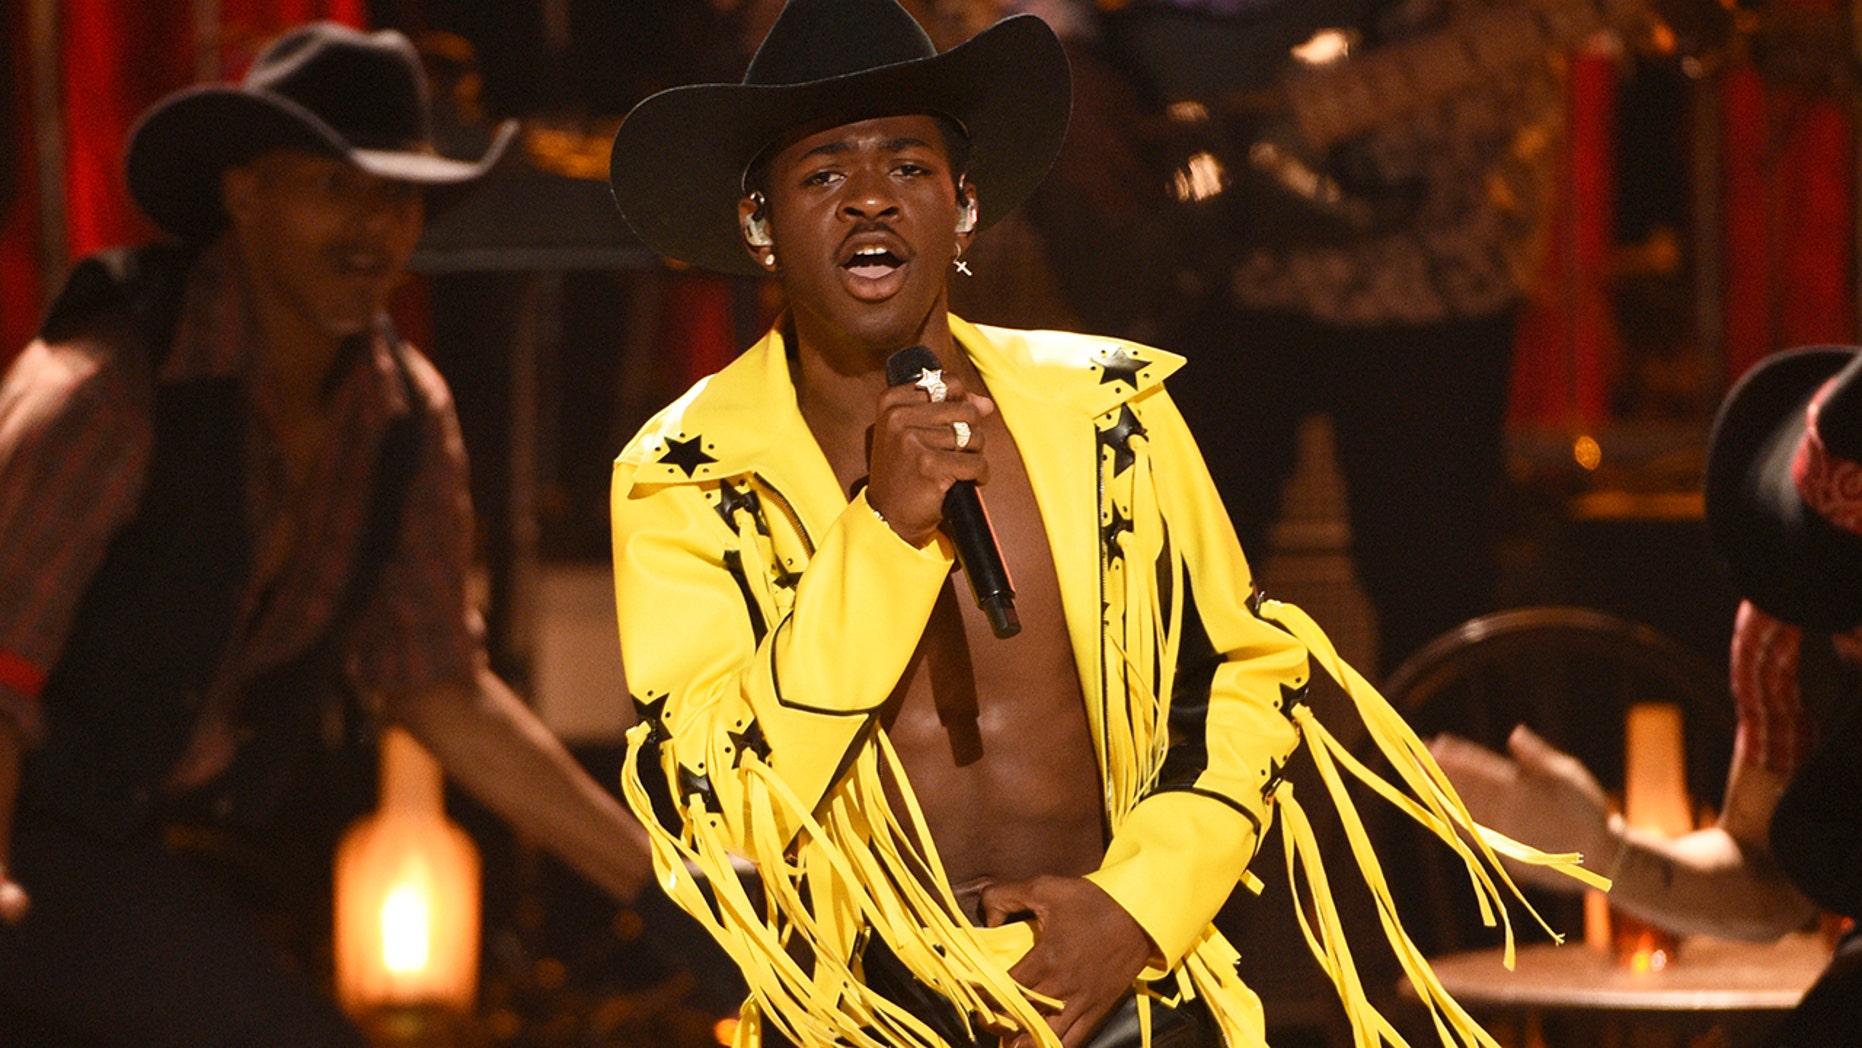 Old Town Road Rapper Lil Nas X Appears To Come Out During Pride Month Fox News 0165